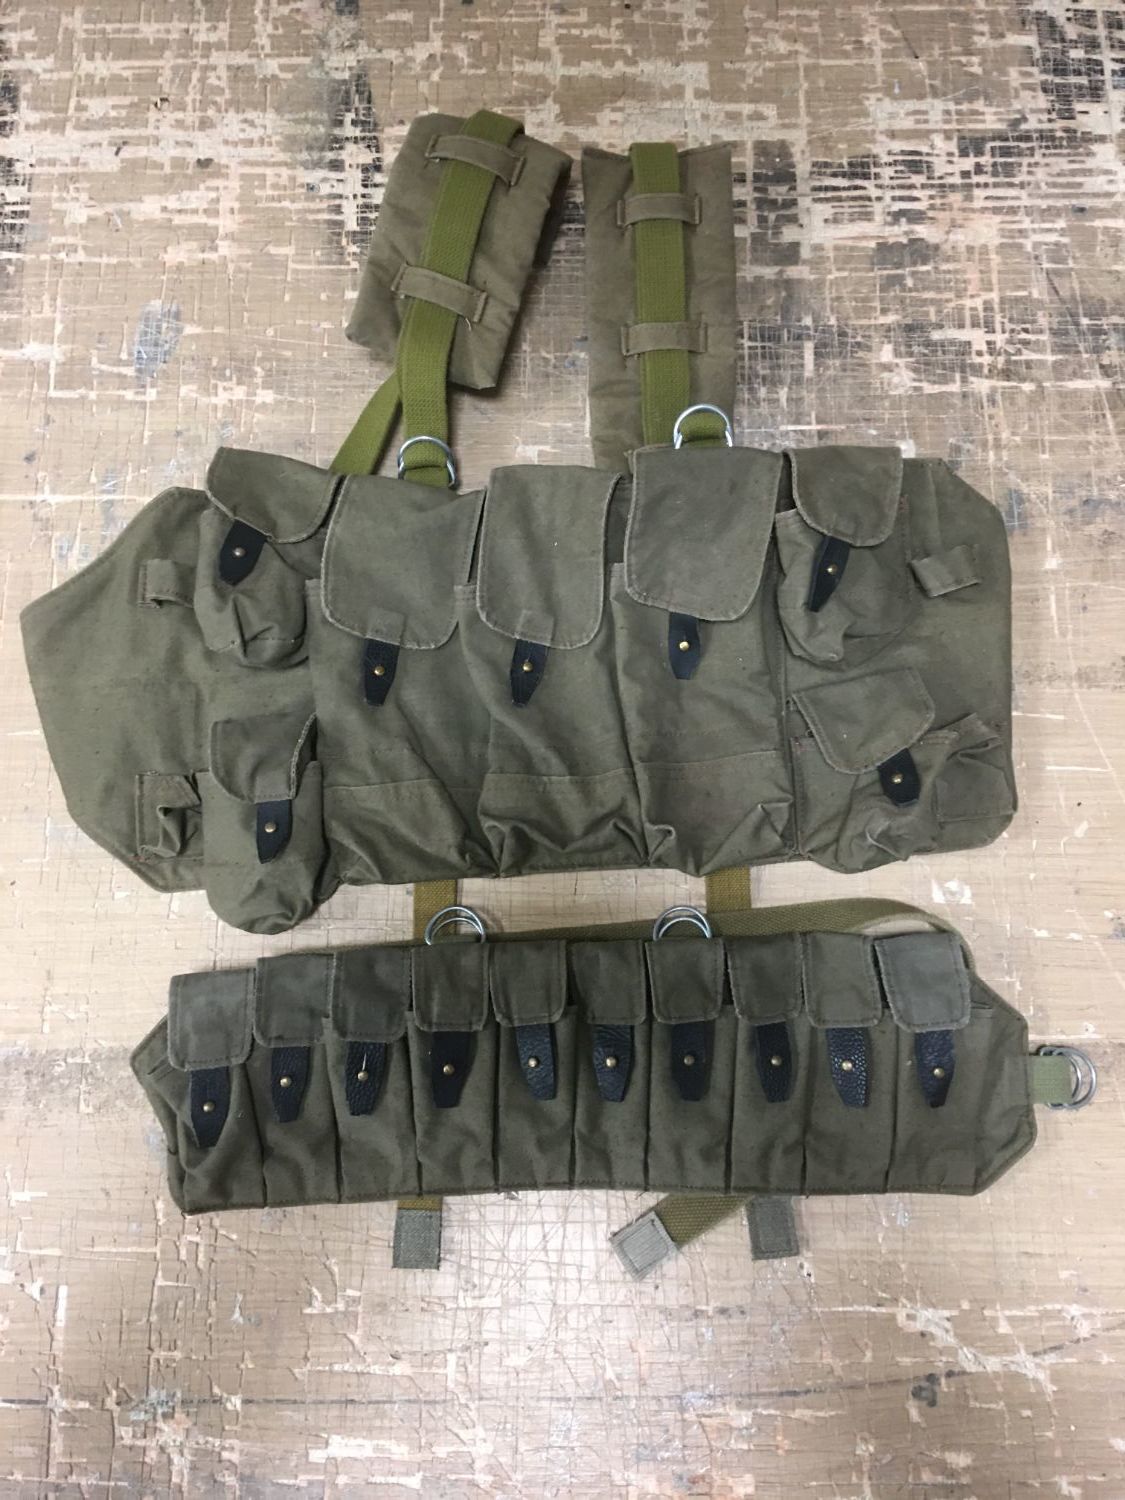 Soviet Poyas Belt A chest Rig and Poyas B Belt as - Gear - Airsoft ...